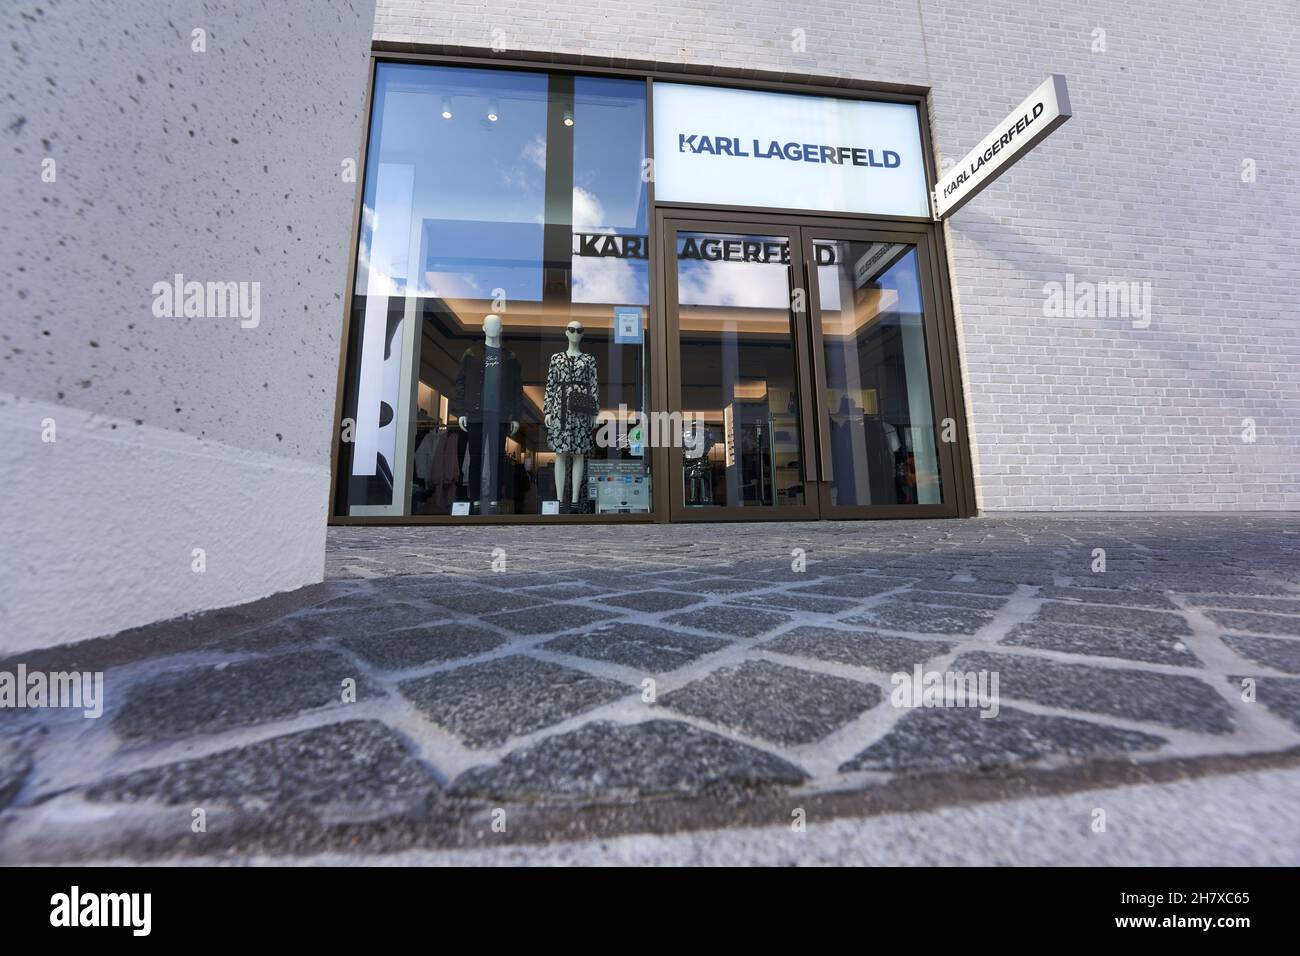 https://c8.alamy.com/comp/2H7XC65/metzingen-germany-march-20-2021-karl-lagerfeld-outlet-store-bright-exterior-facade-cobblestone-in-the-foreground-up-view-wide-angle-2H7XC65.jpg